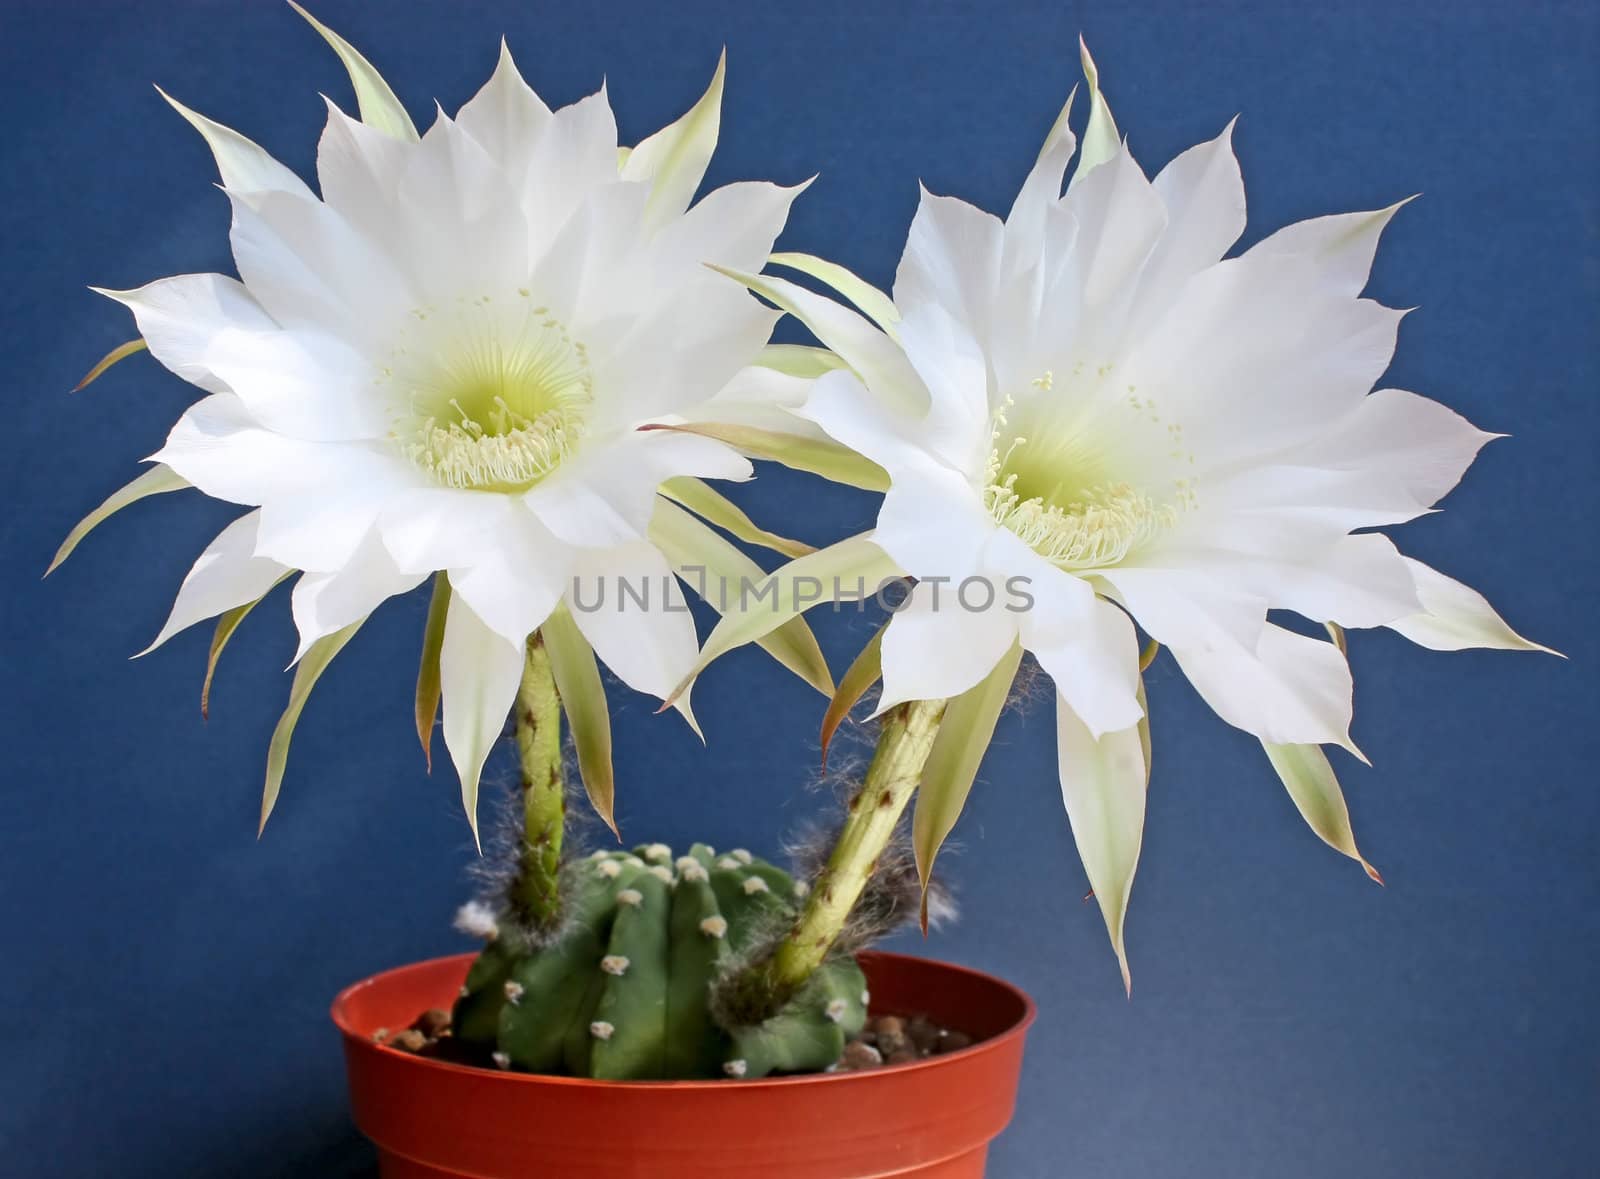 Cactus with blossoms on a  dark background (Echinopsis).